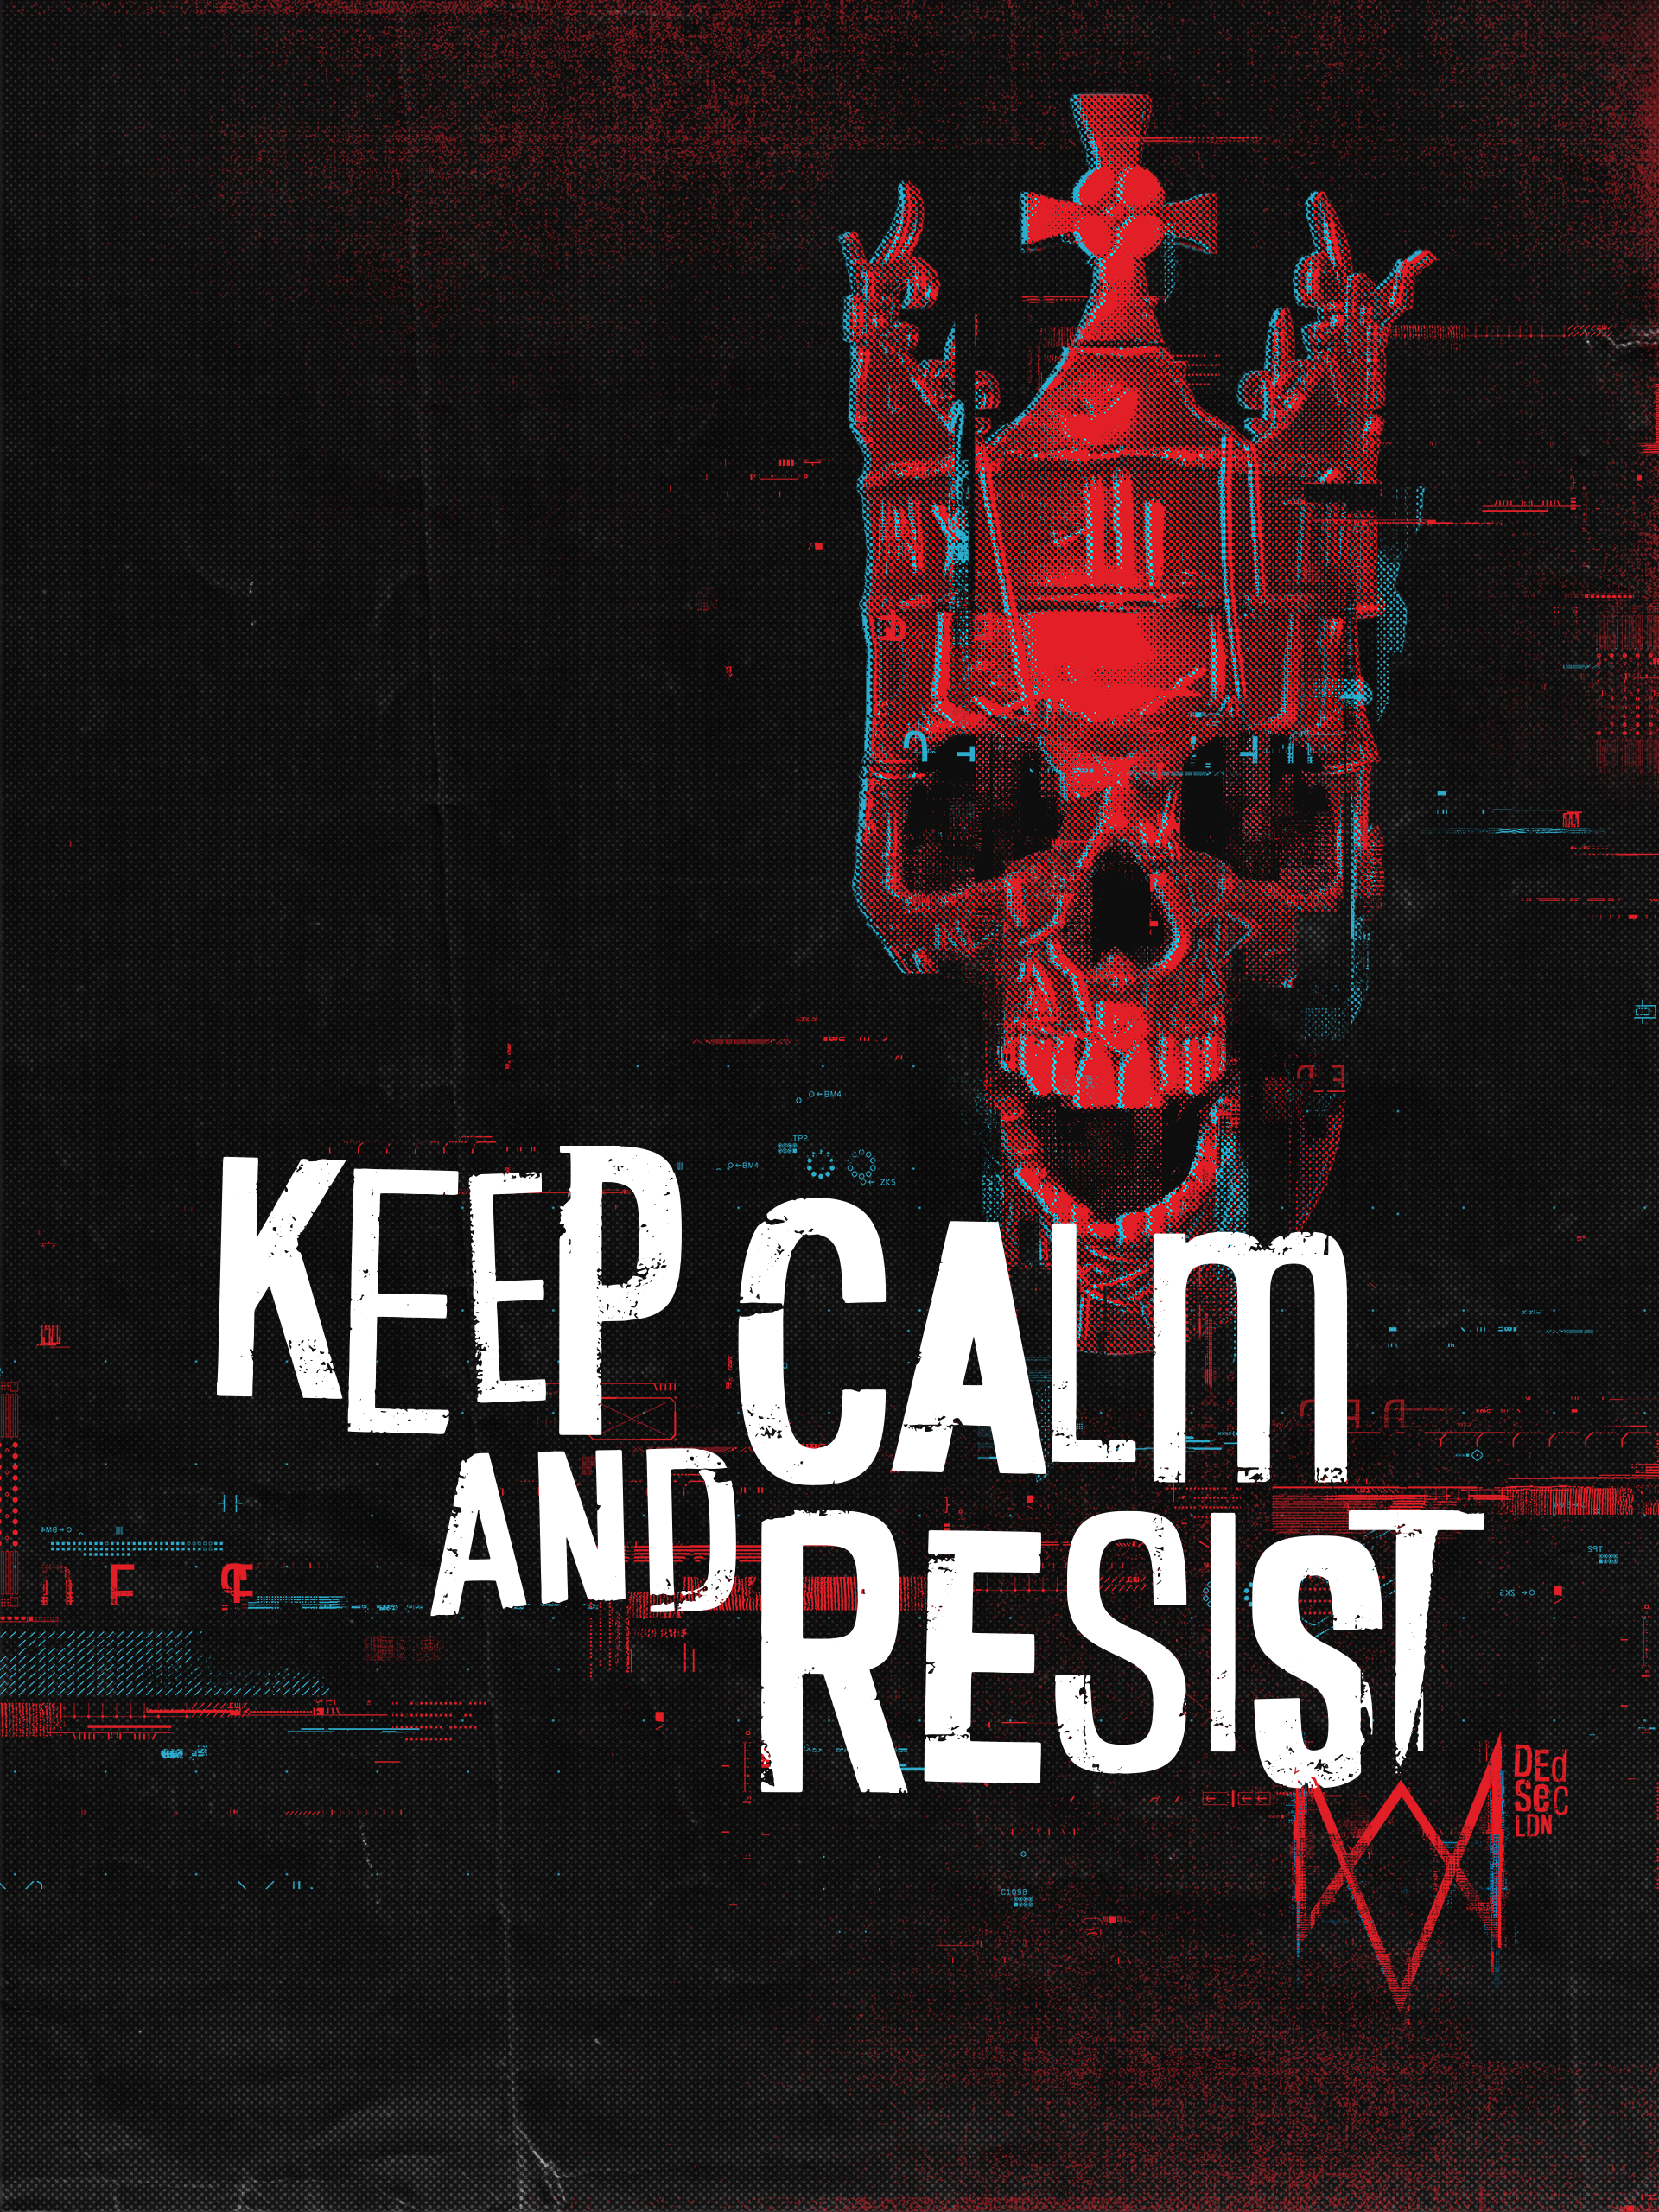 Watch Dogs Keep Calm And Resist Poster